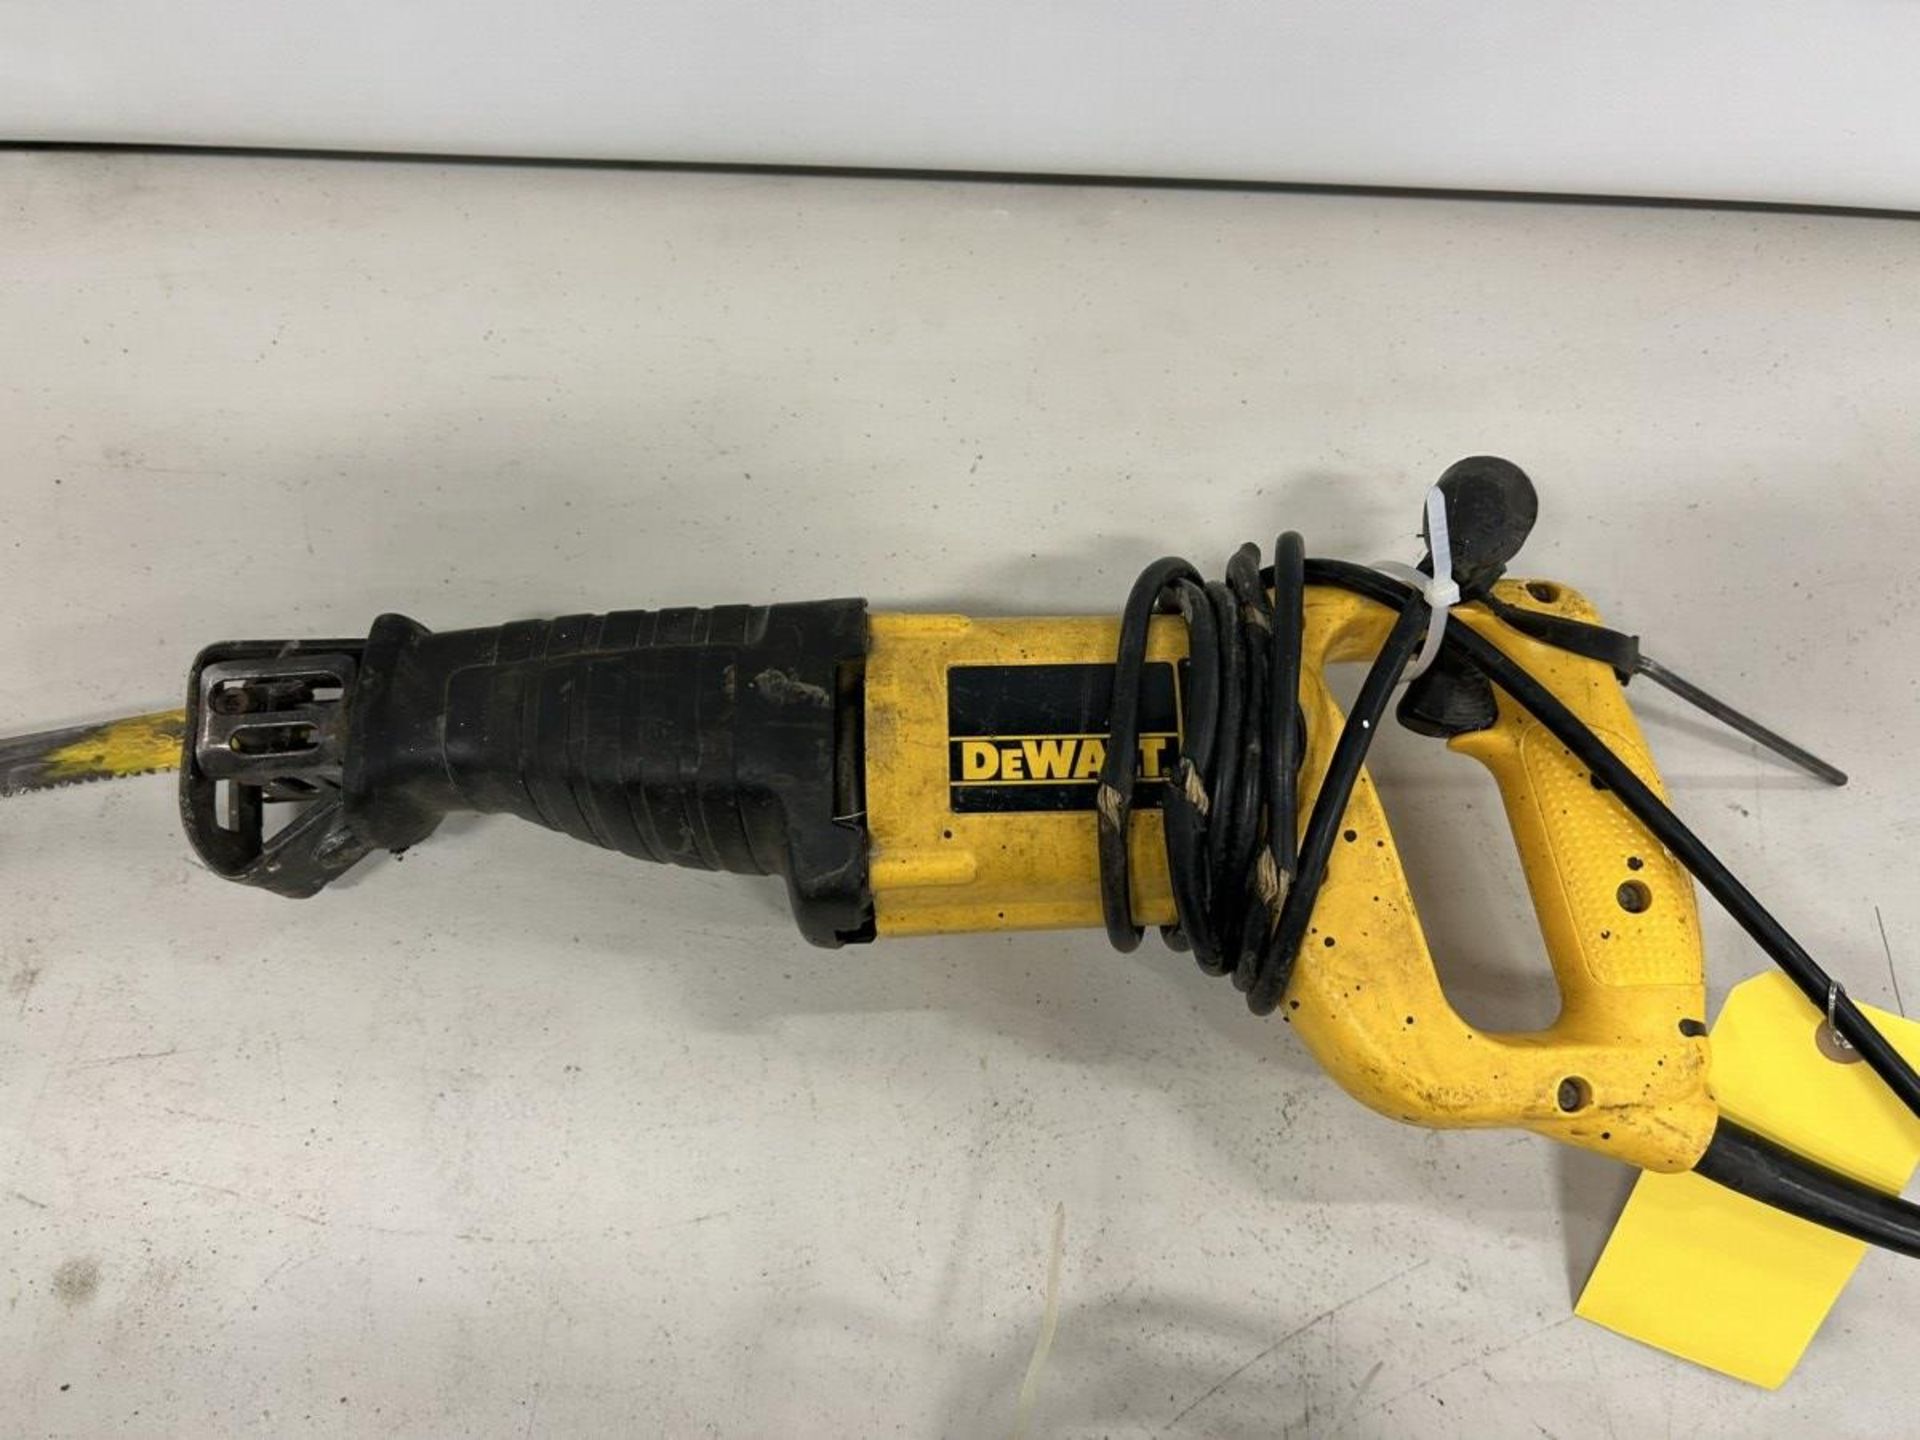 DEWALT CORDED RECIPROCATING SAW, POWER FIST CORDED ELECTRIC SHEAR, & AIR IMPACT GUN - Image 2 of 8